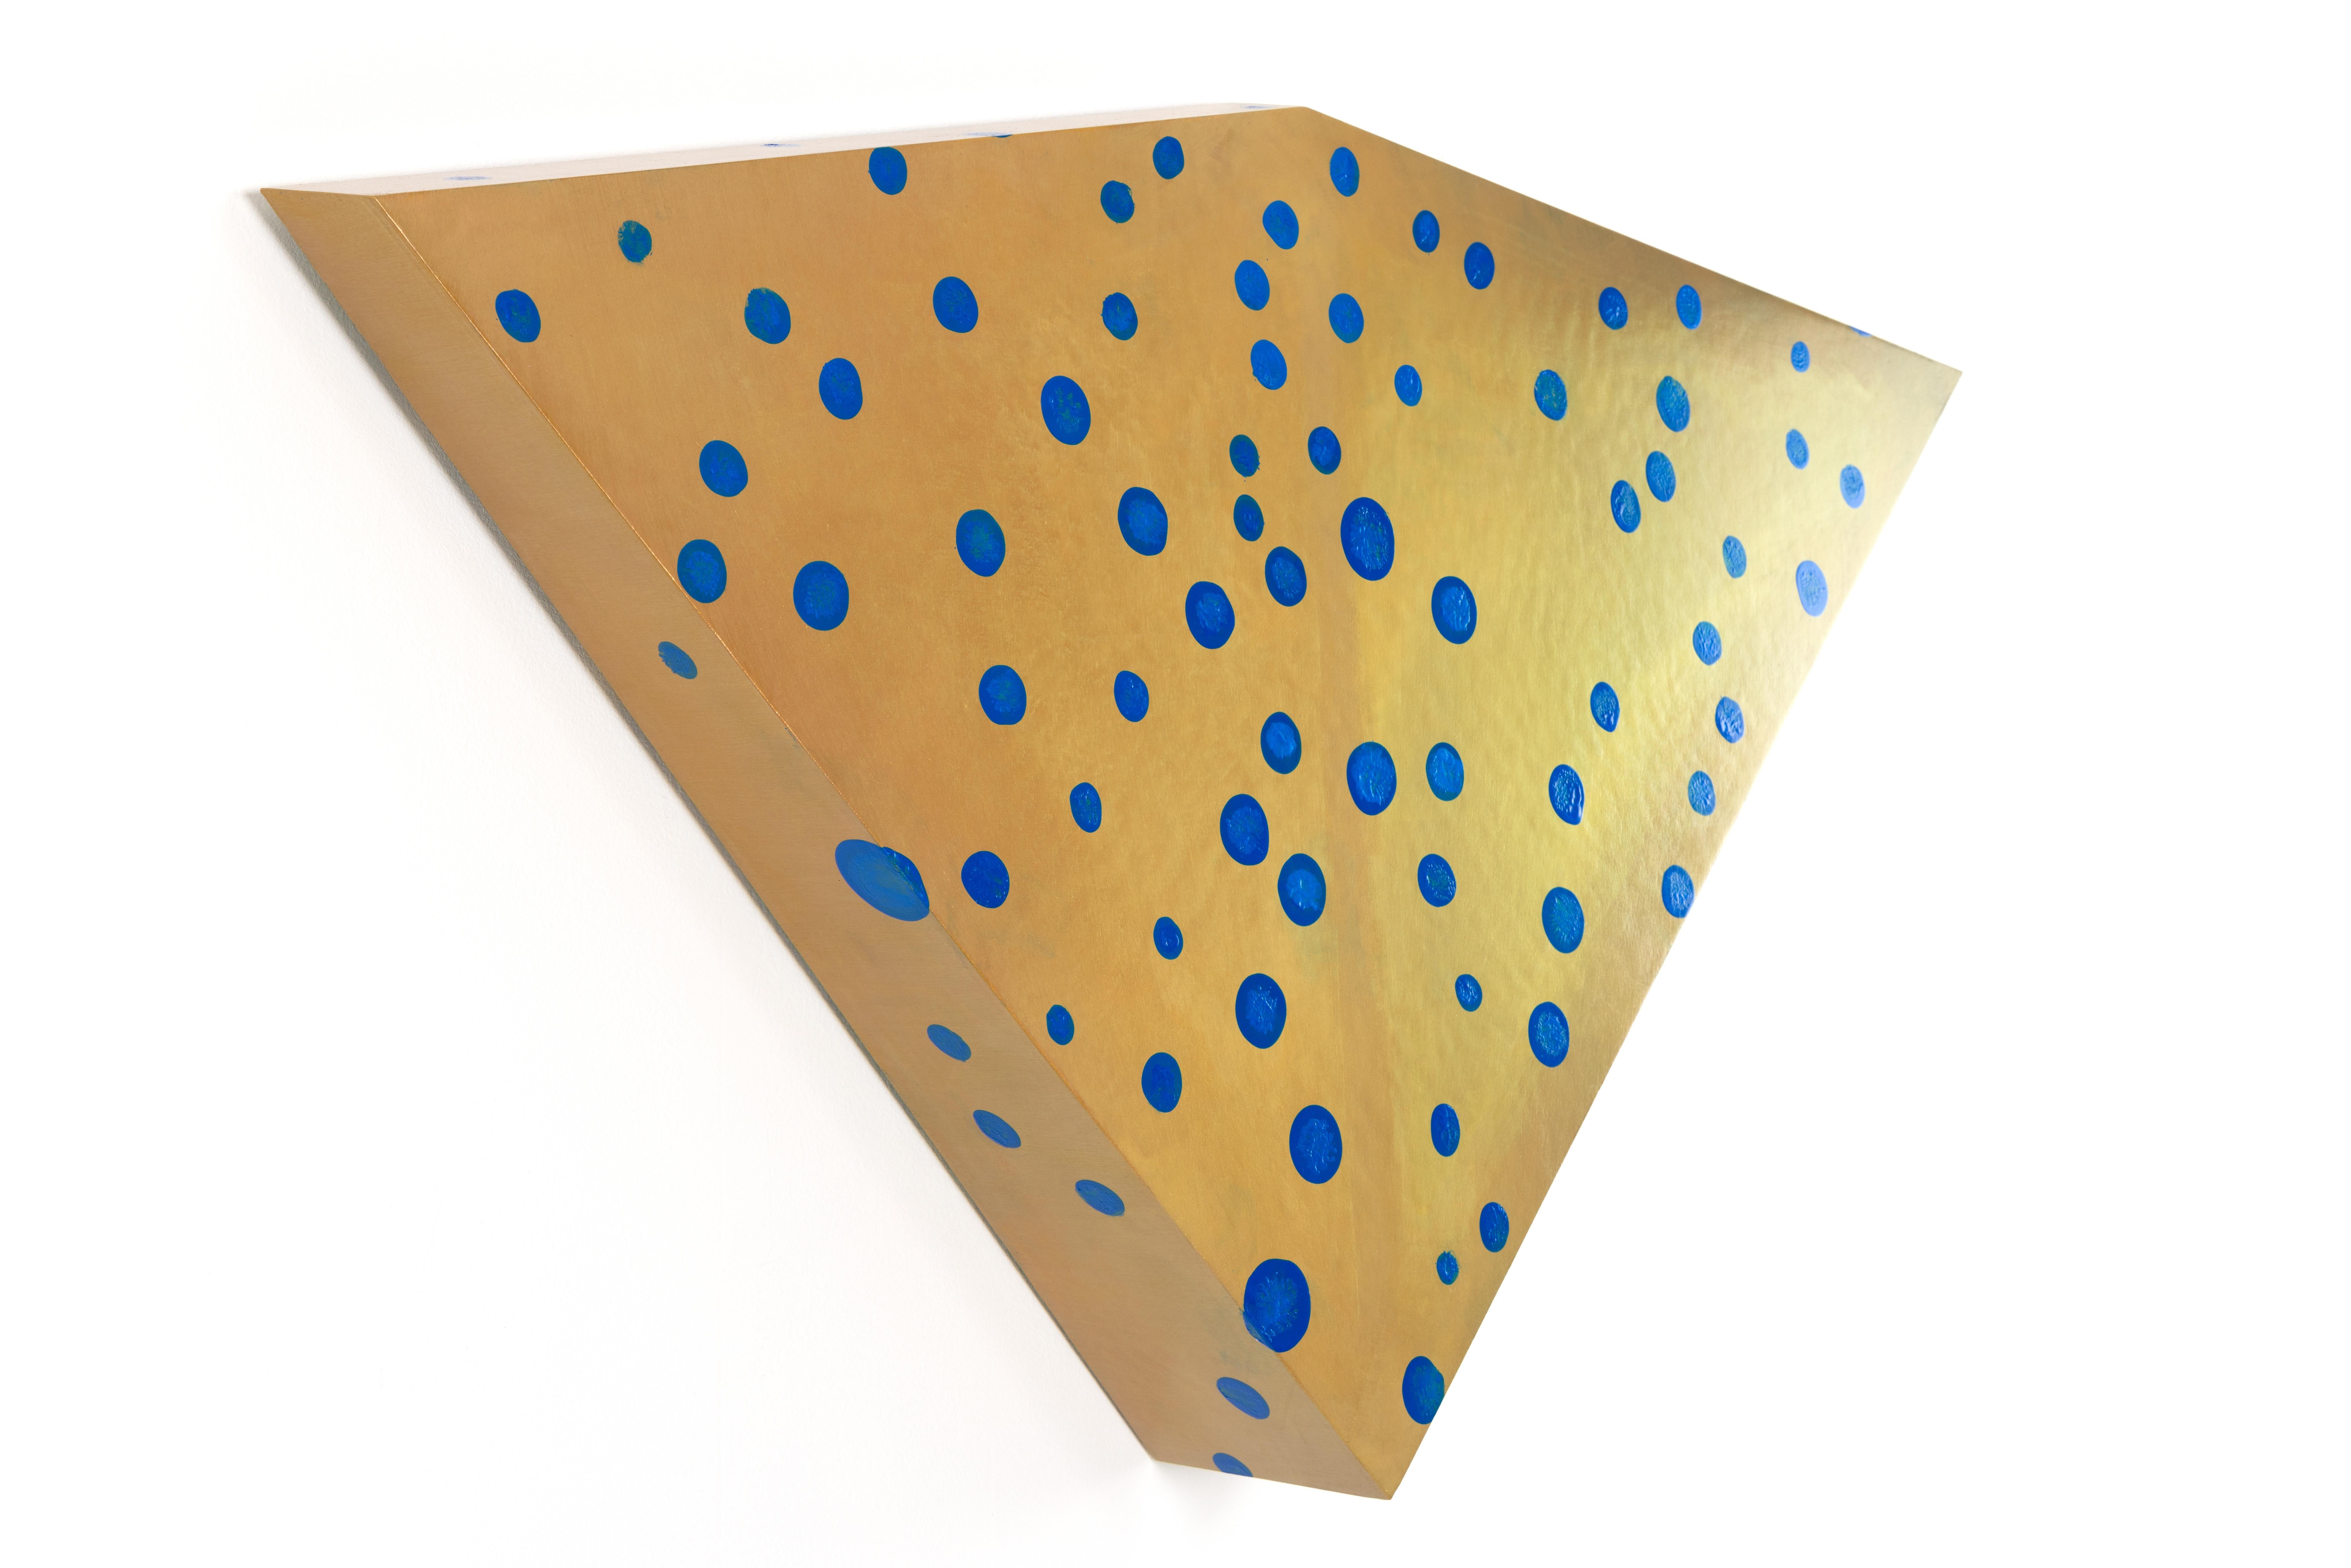 STINGRAY - Geometric Wall Hanging Sculpture/Painting in Acrylic & Panel - Beige Abstract Painting by Brandon Woods